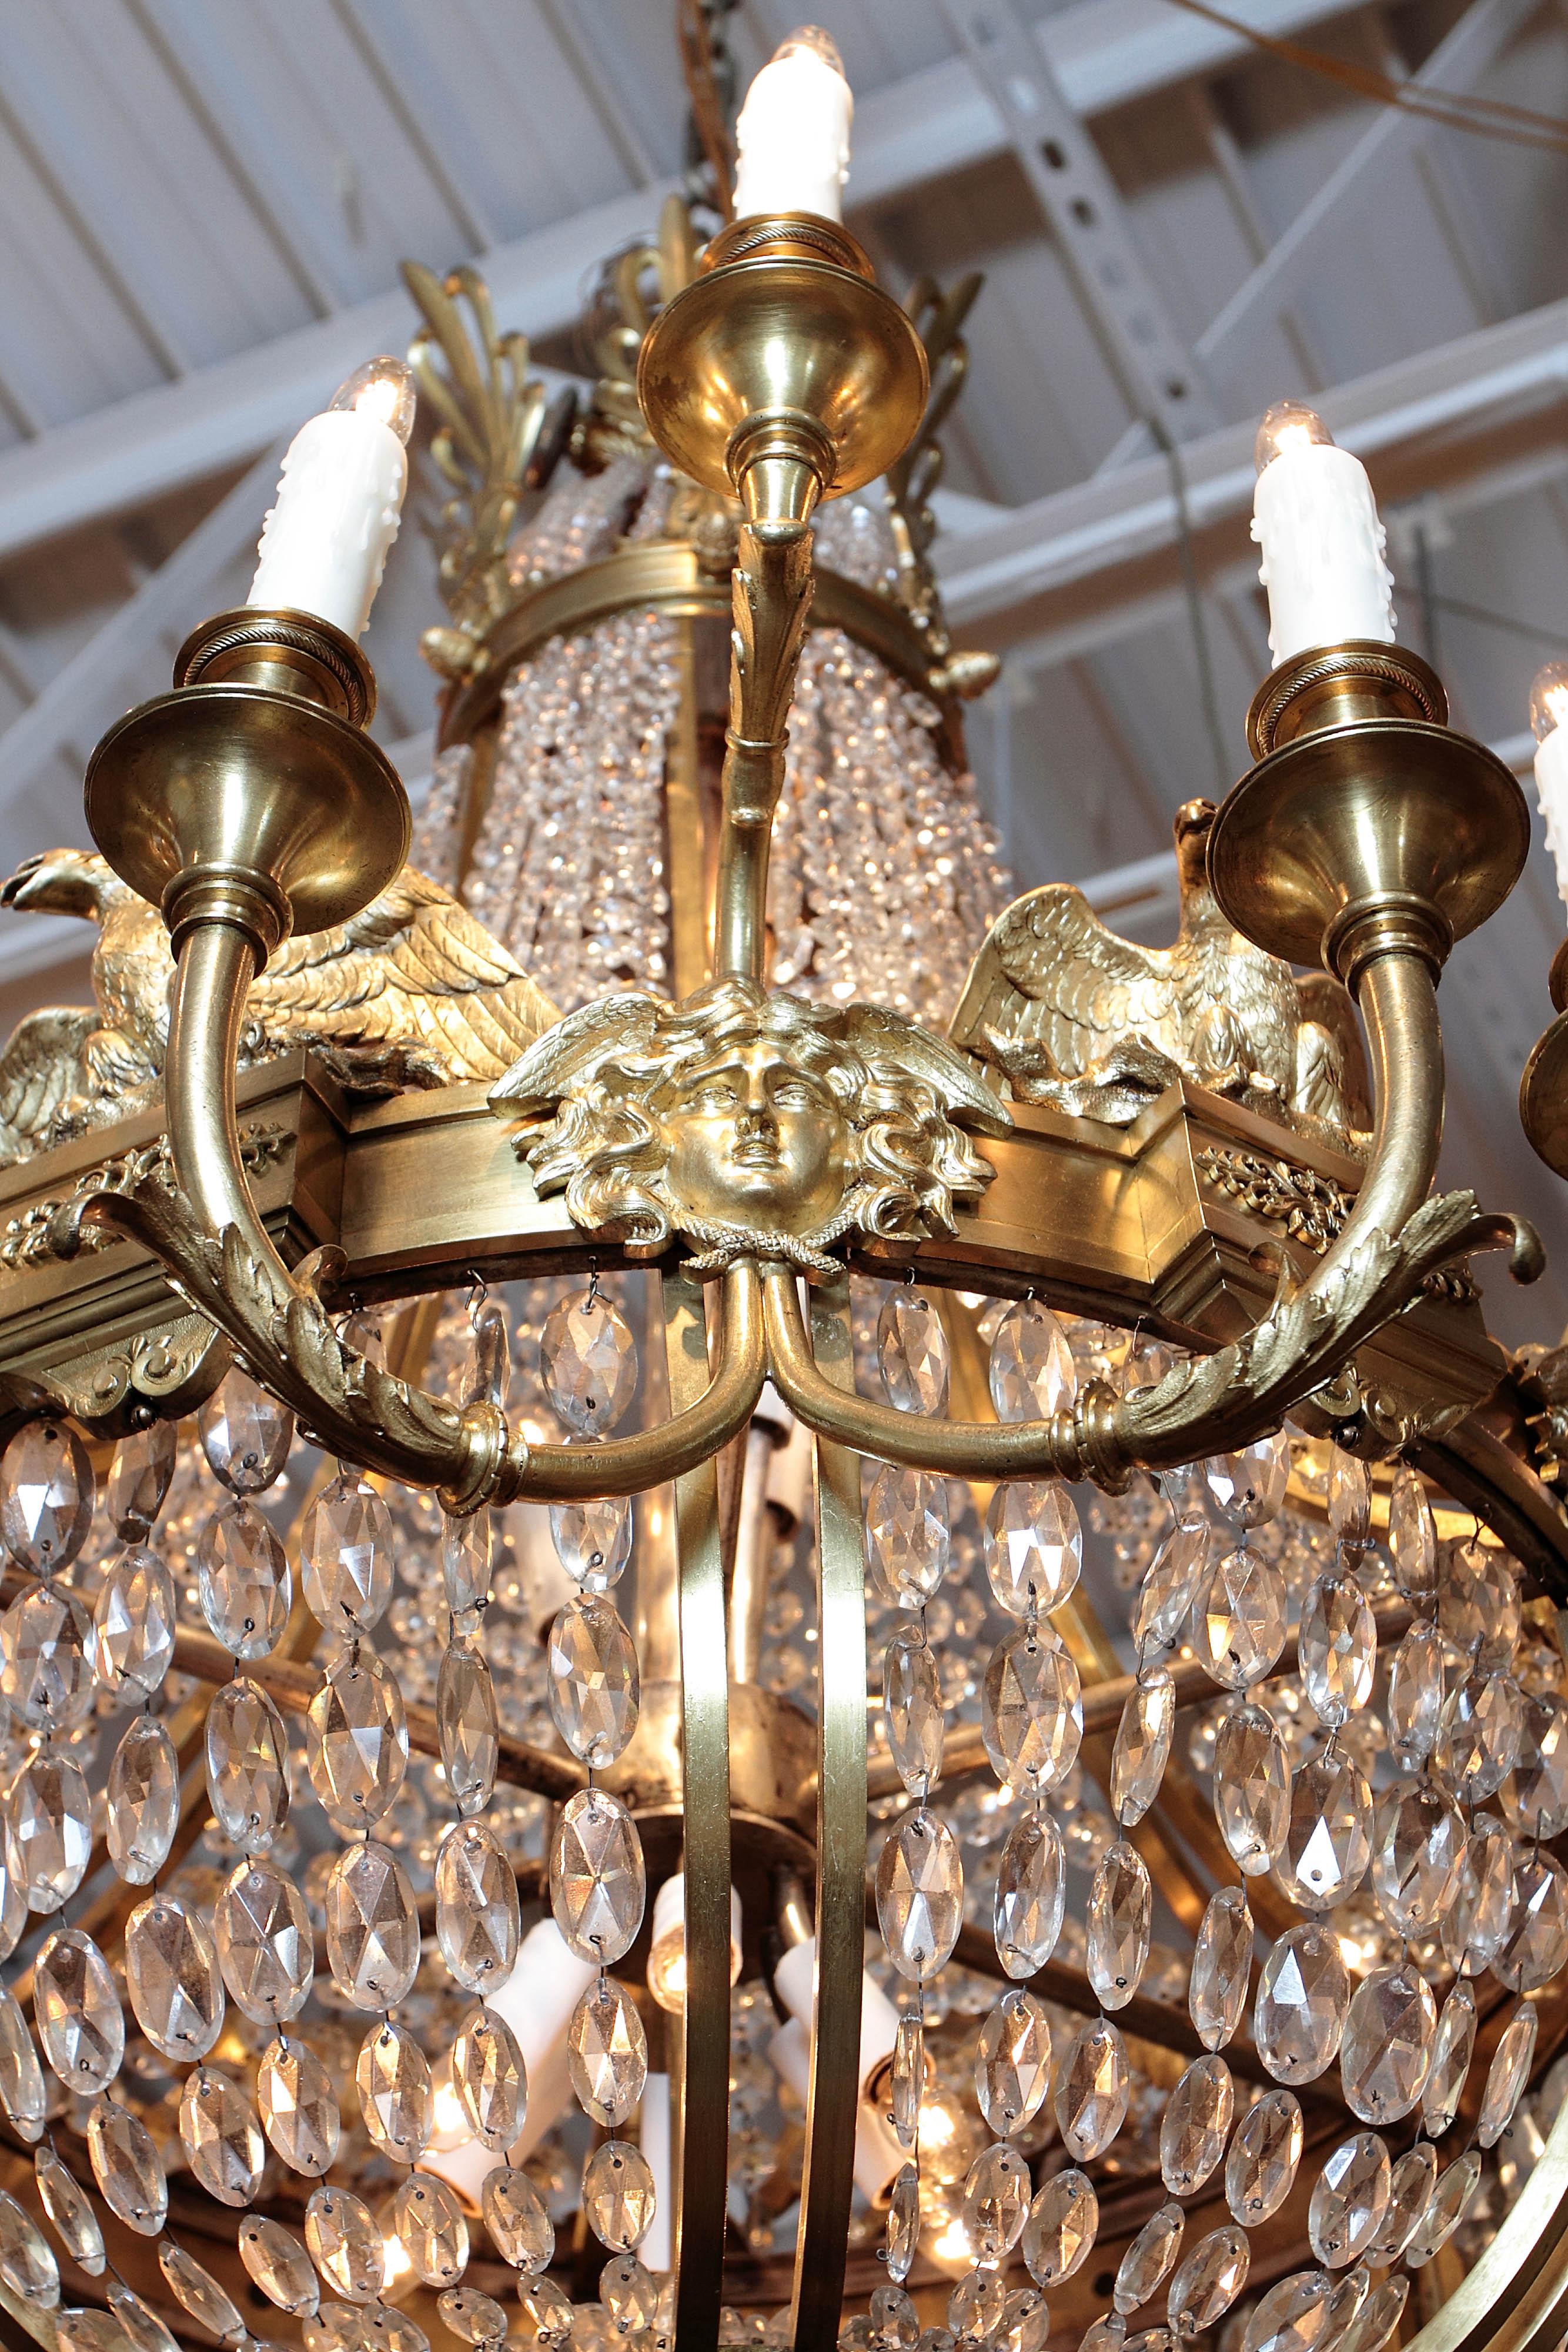 19th Century Important late 19th c American Empire Cut Crystal and Bronze Doré Chandelier